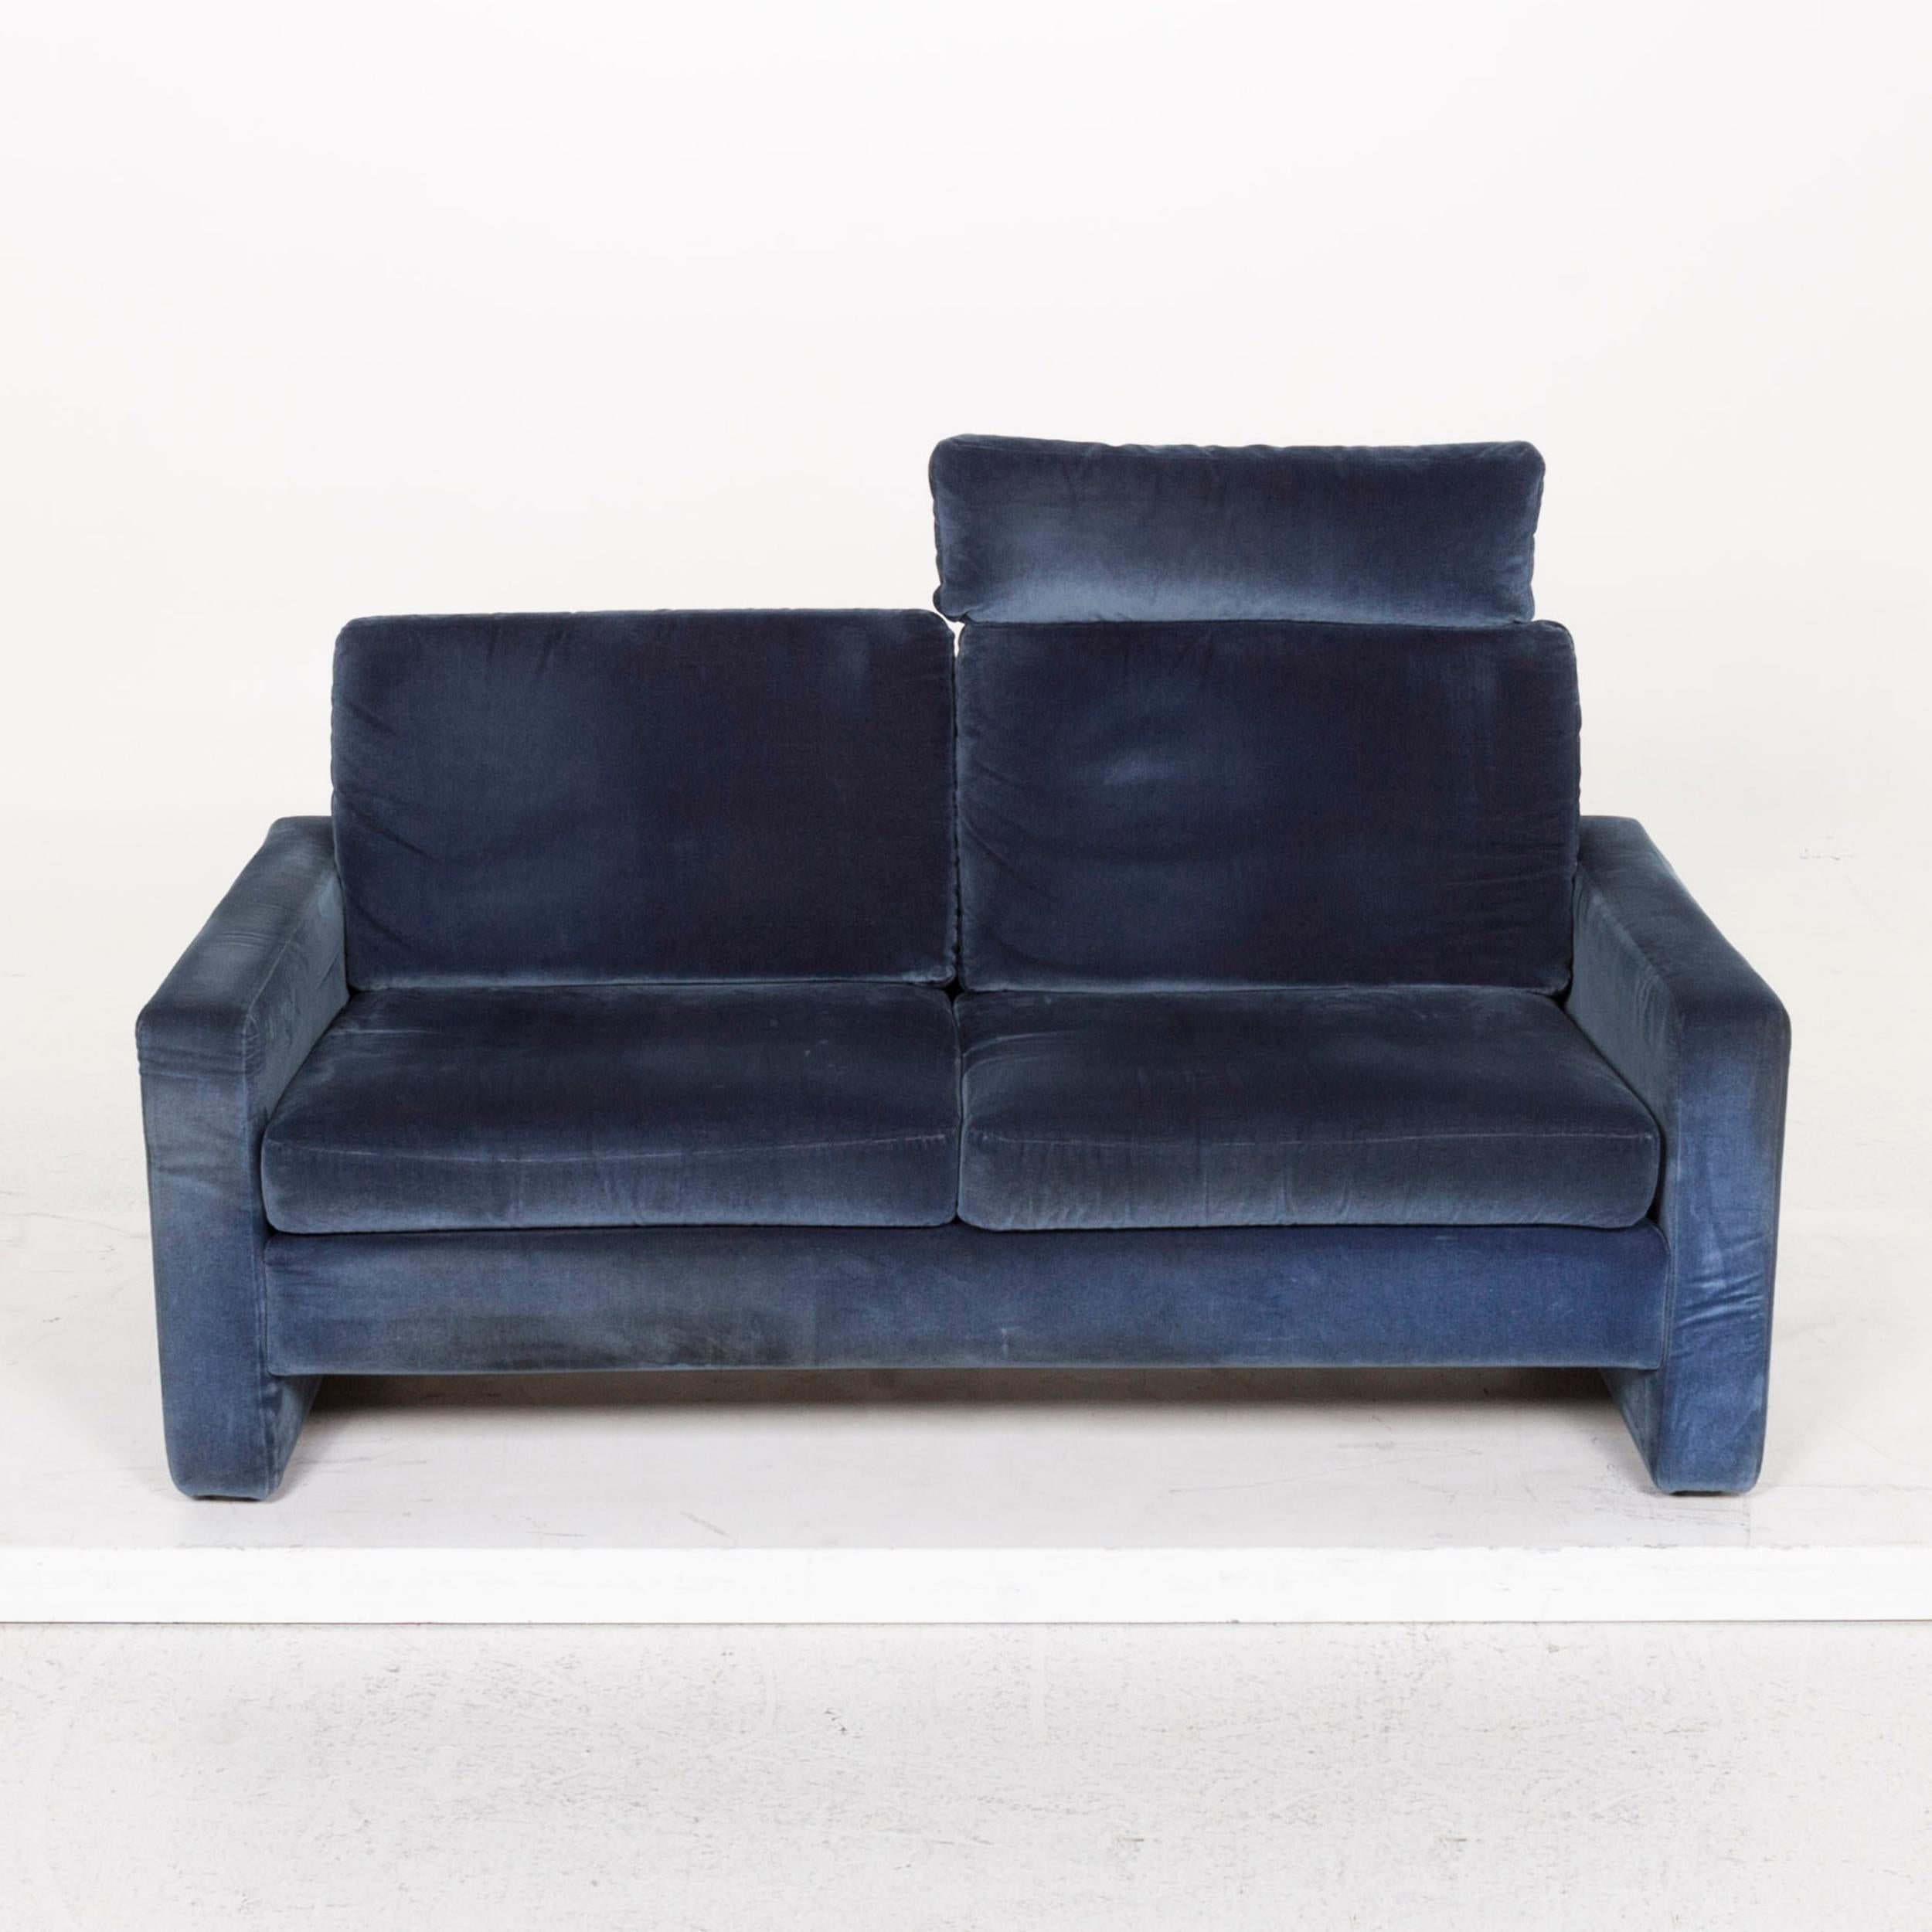 COR Conseta Fabric Sofa Blue Two-Seat Function Couch In Good Condition For Sale In Cologne, DE